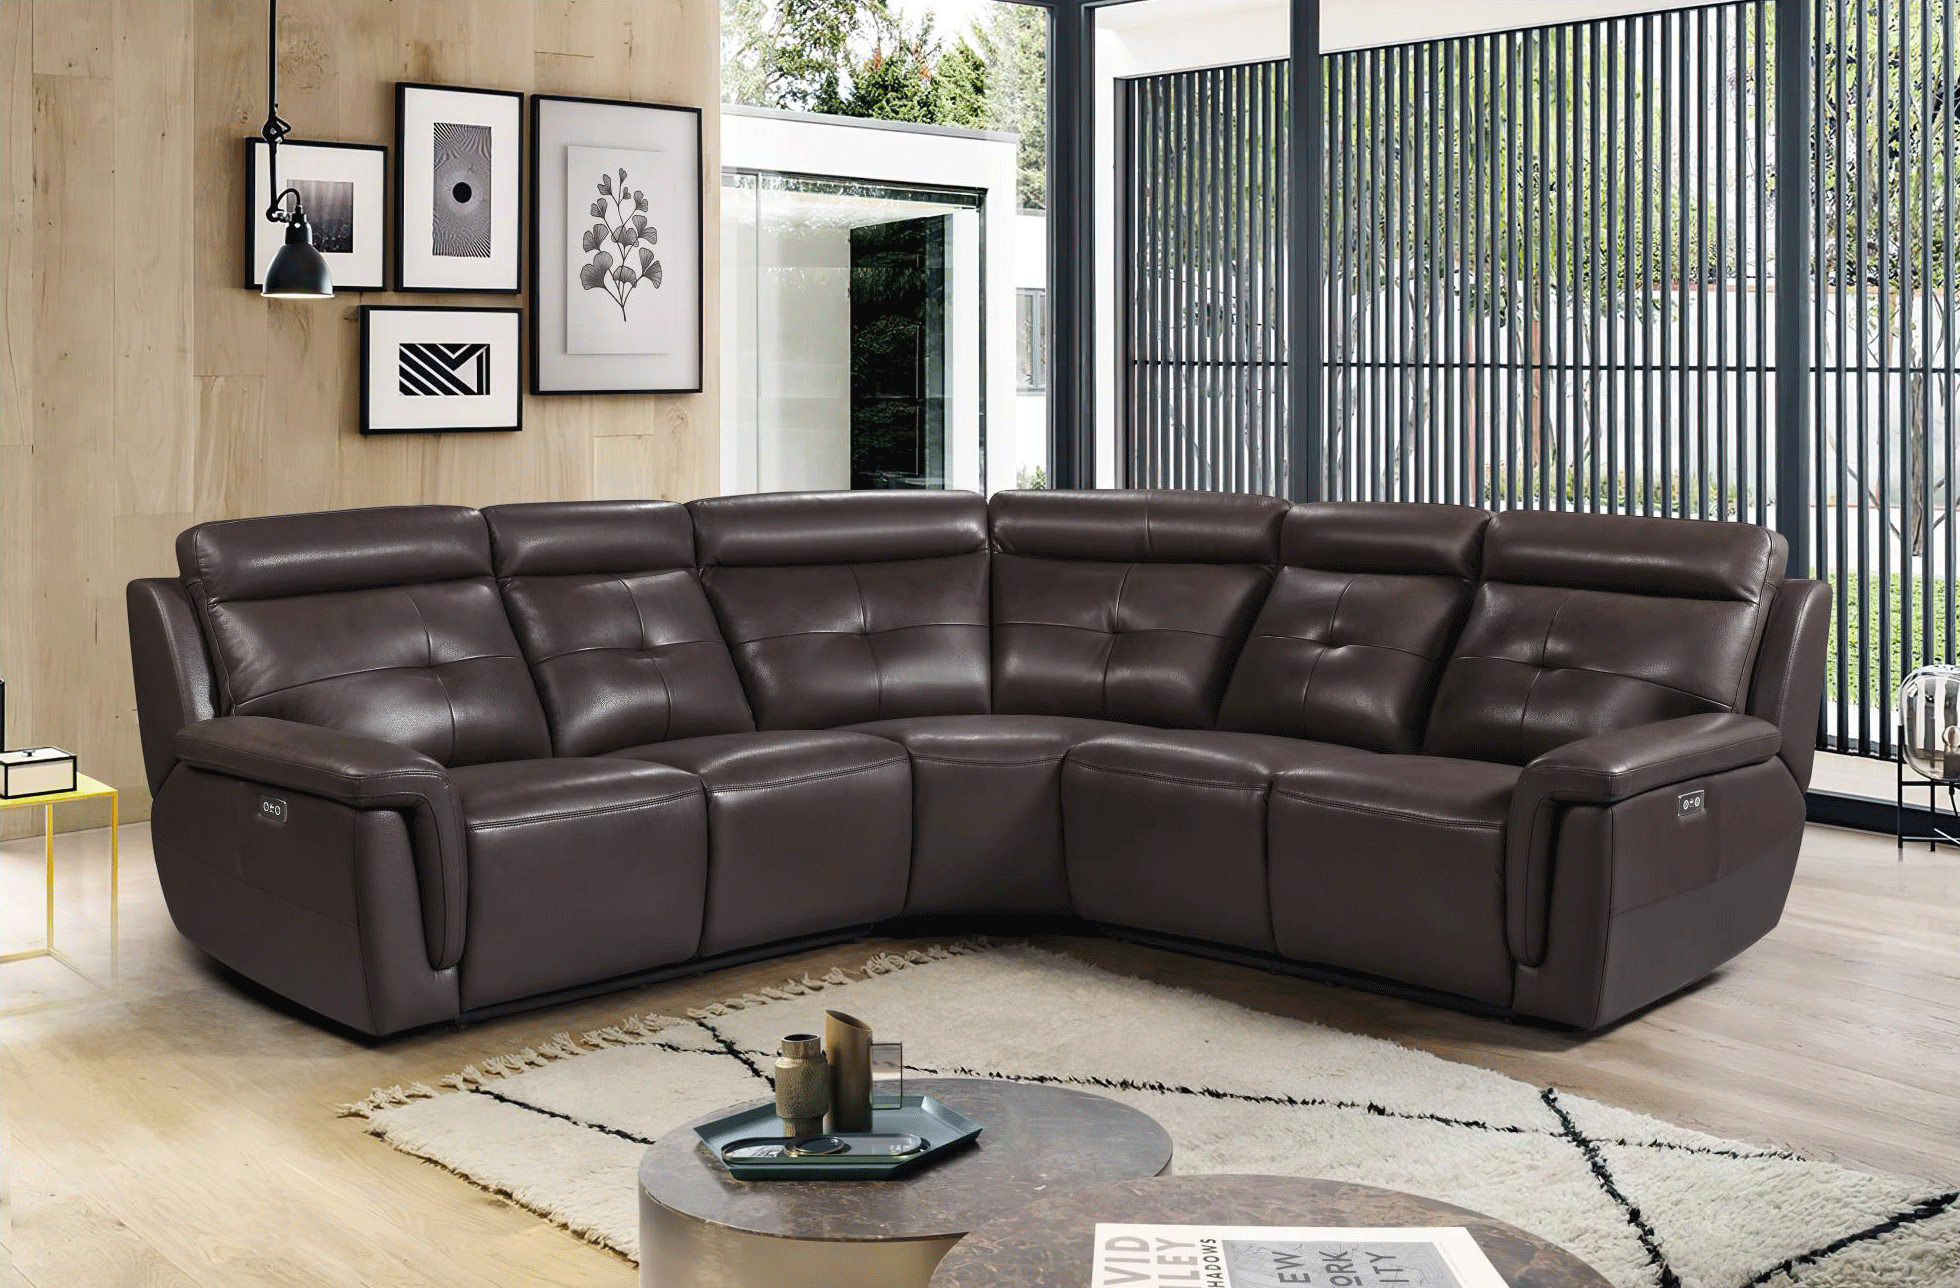 Brands ALF Capri Coffee Tables, Italy 2937 Sectional w/ electric recliners